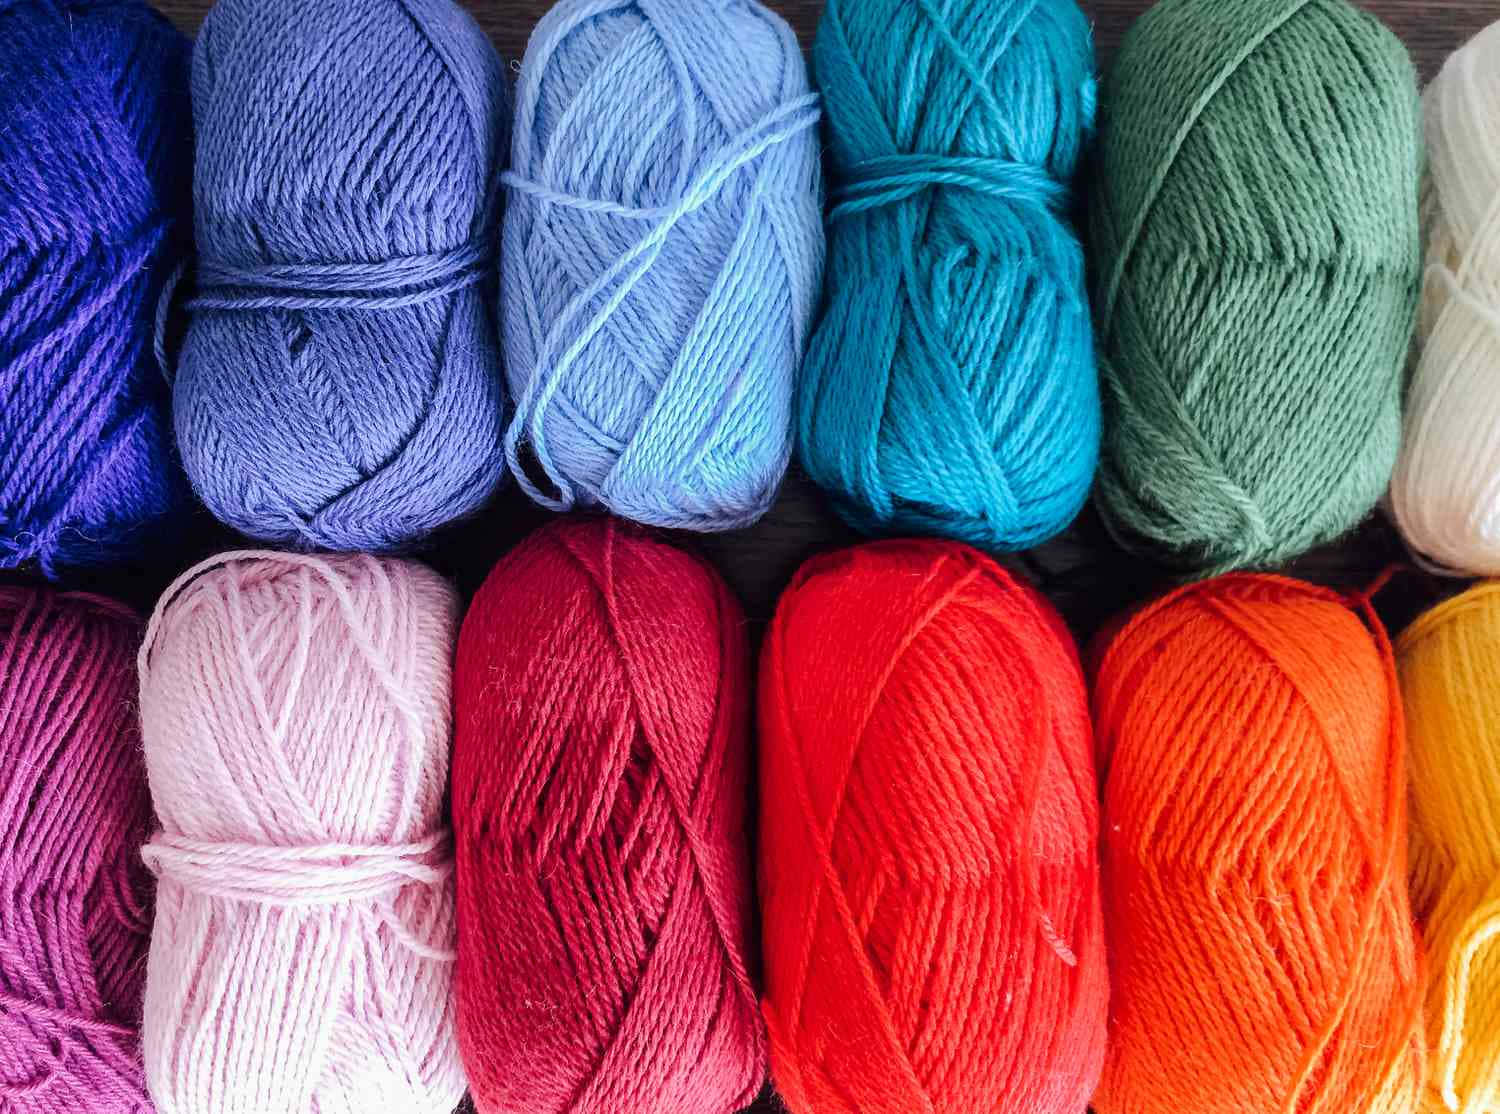 Different Shades Of Knitting Yarn Skeins Wallpaper